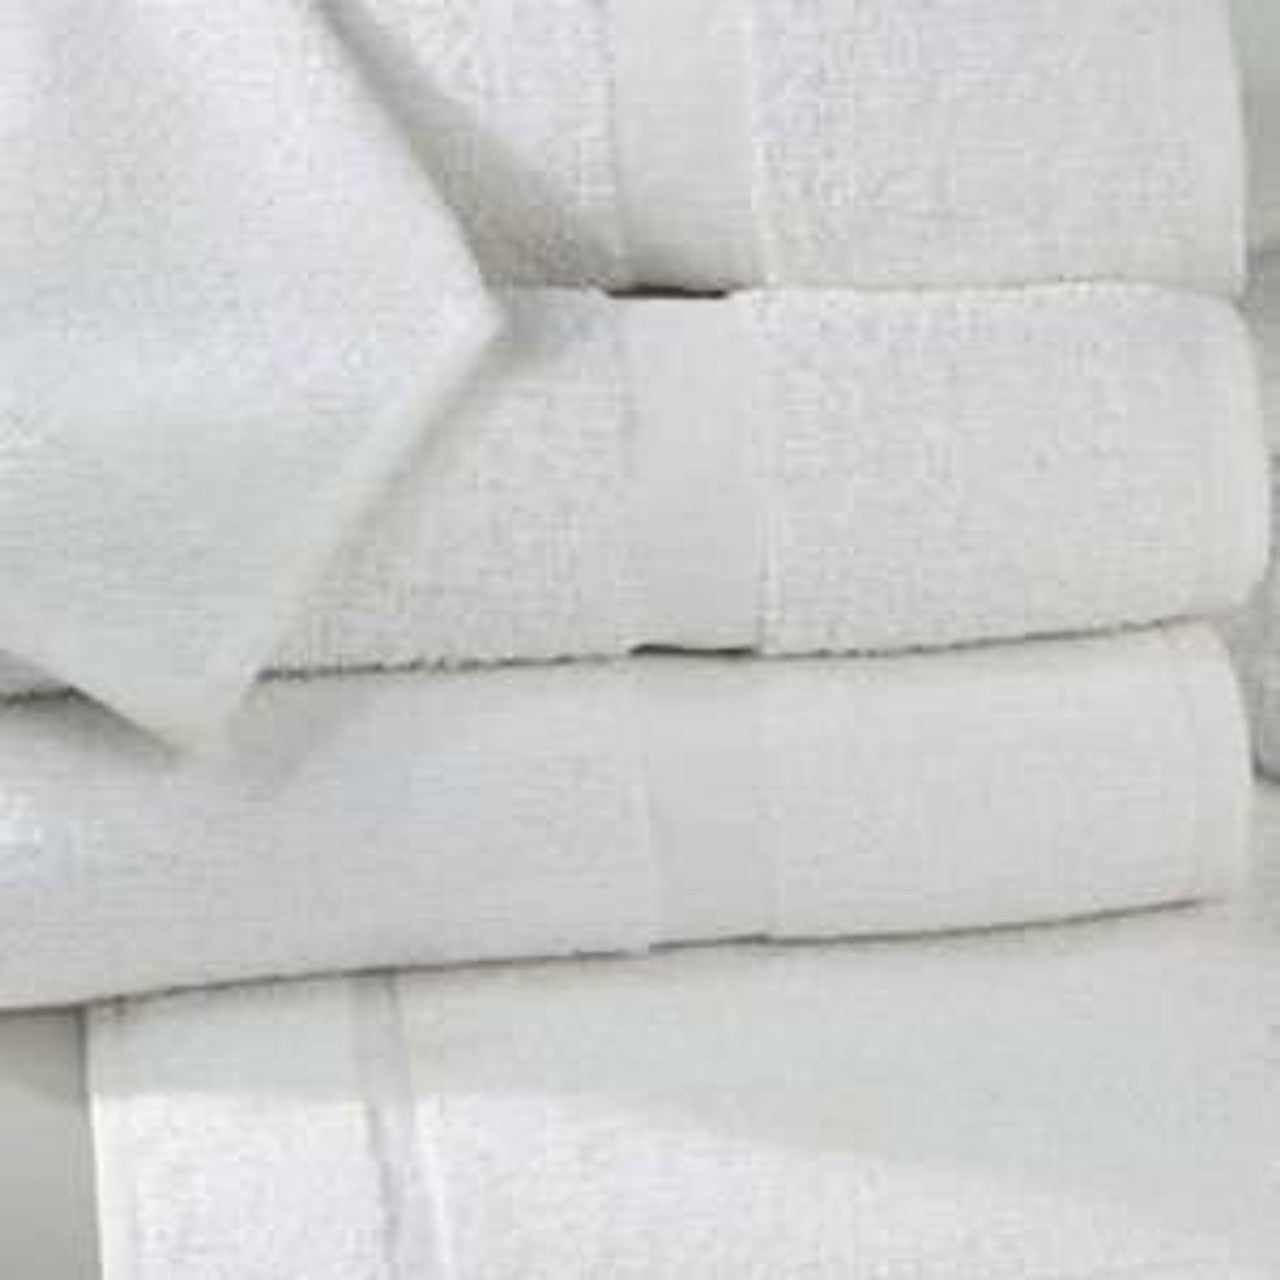 Admiral Hospitality Bath Towels 12-Pack, 24x48 in. or 24x50 in., White Blended Cotton - 24 x 48